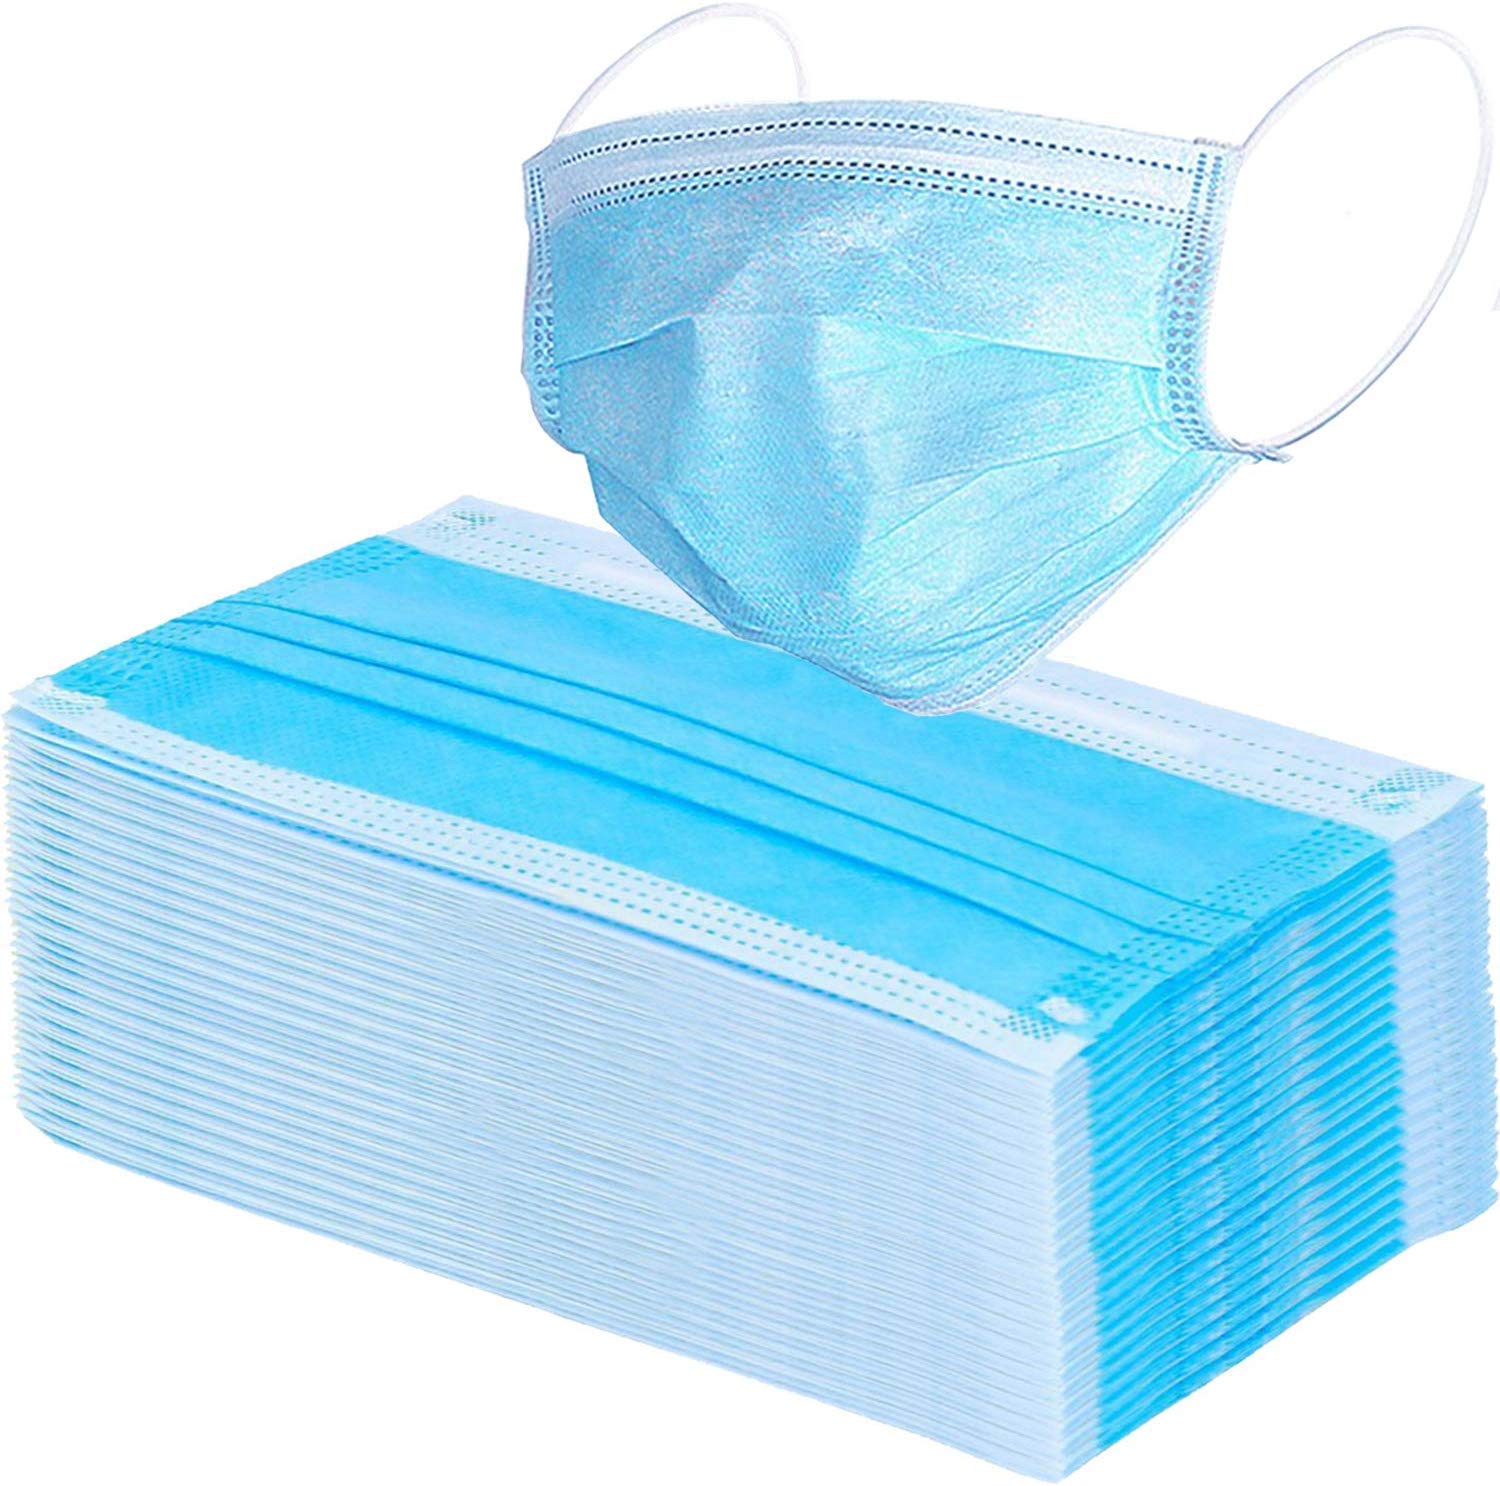 PROSENCE Non Woven fabric Surgical Mask 3 Layer With Nose Clip100  Disposable Face Mask Pack Of 100 Pcs 3Ply Surgery Mask Use&Throw Mask  Sargical